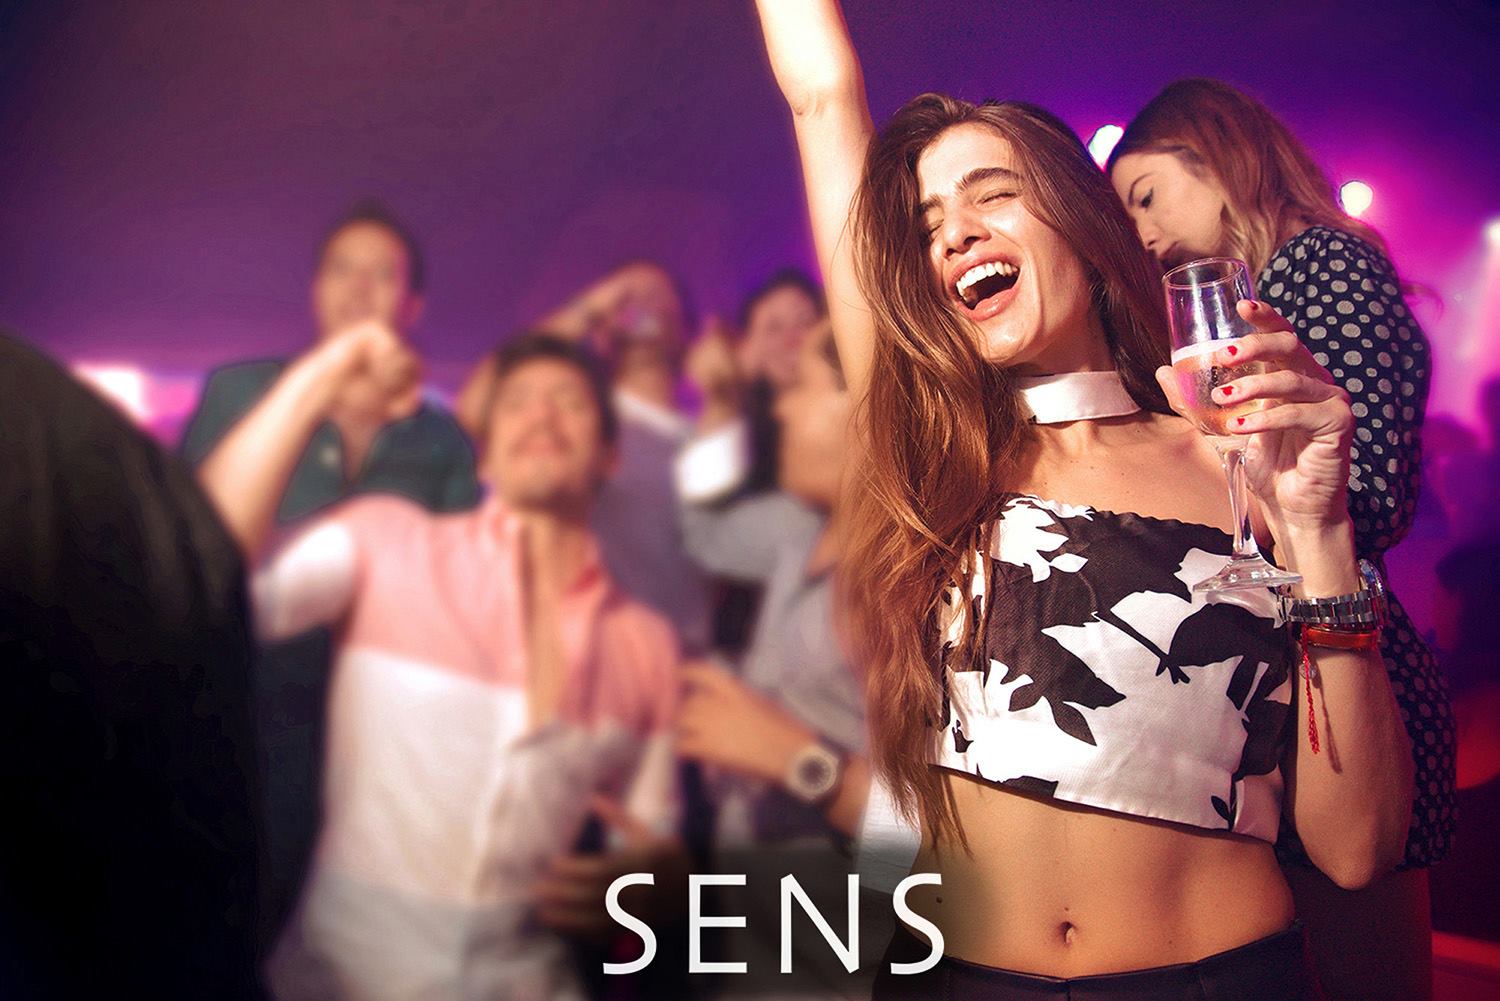 Sens Club Mexico City - Exclusive club - RSVP strongly recommended